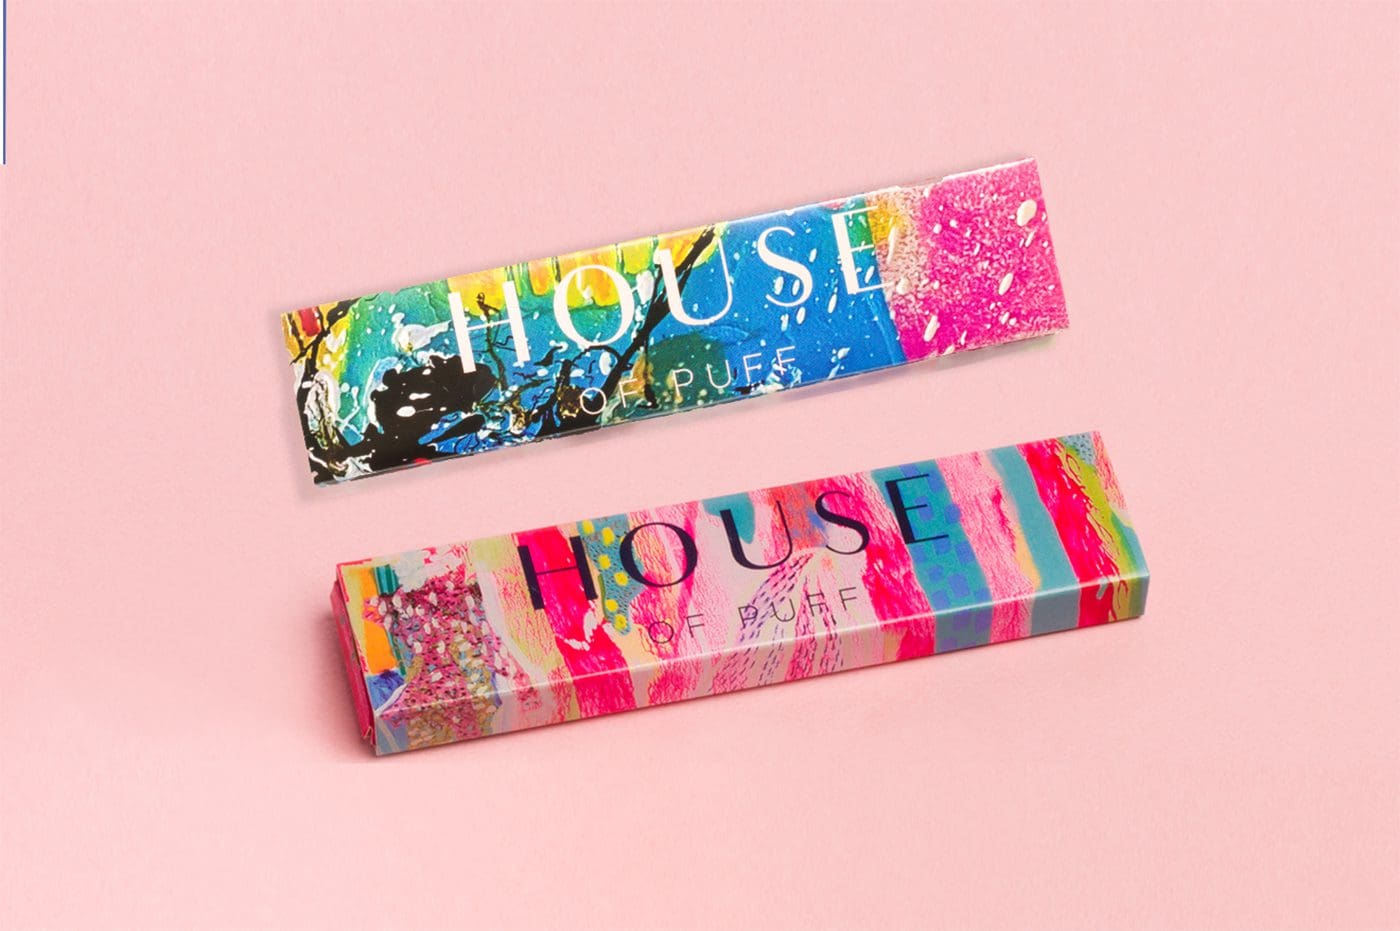 The best smoking gifts for joint rollers are our artist series hemp rolling papers.